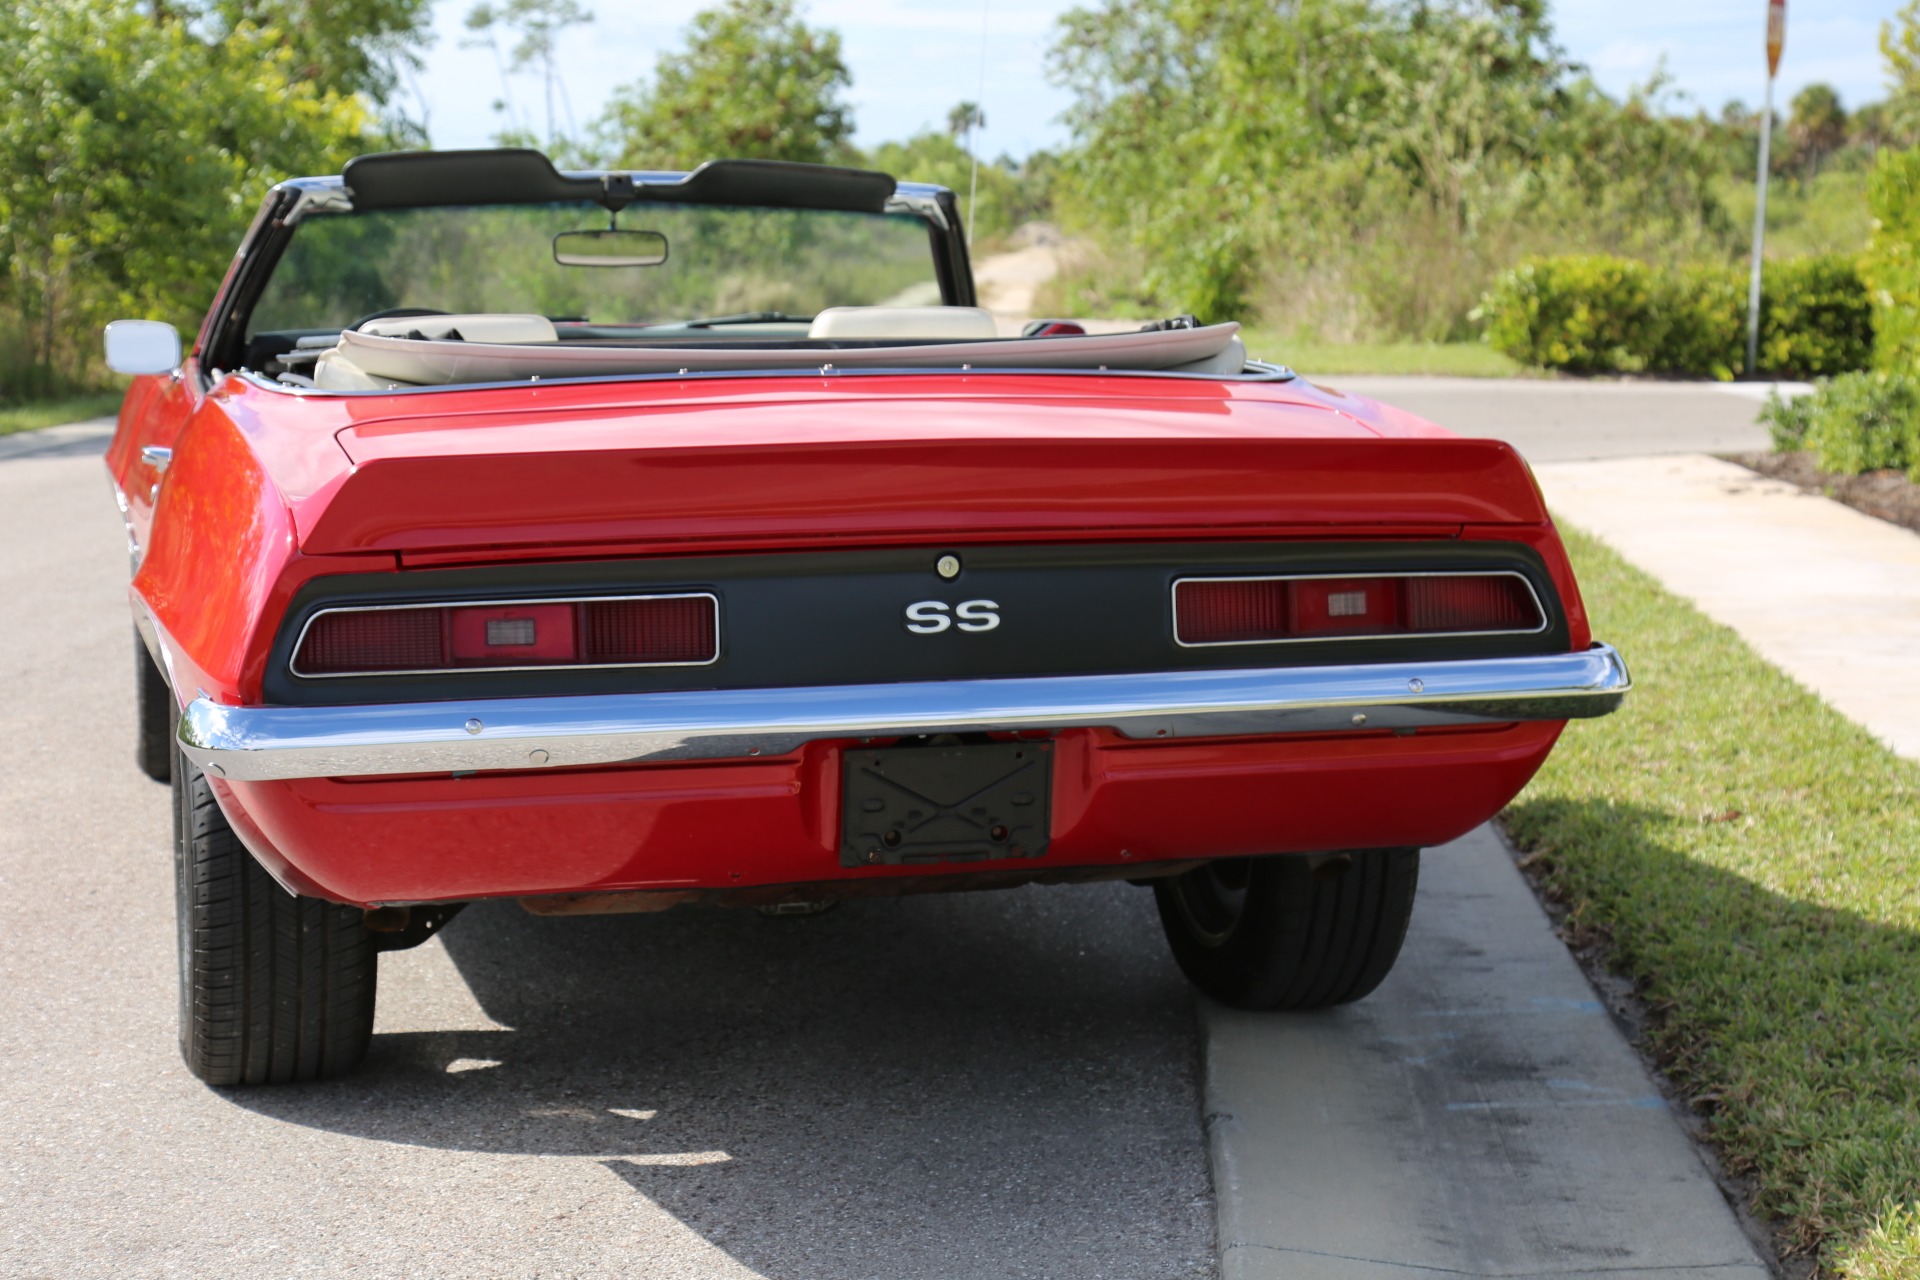 Used 1969 Chevy Camaro Convertible V8 Auto 12 Bolt Rear for sale Sold at Muscle Cars for Sale Inc. in Fort Myers FL 33912 6